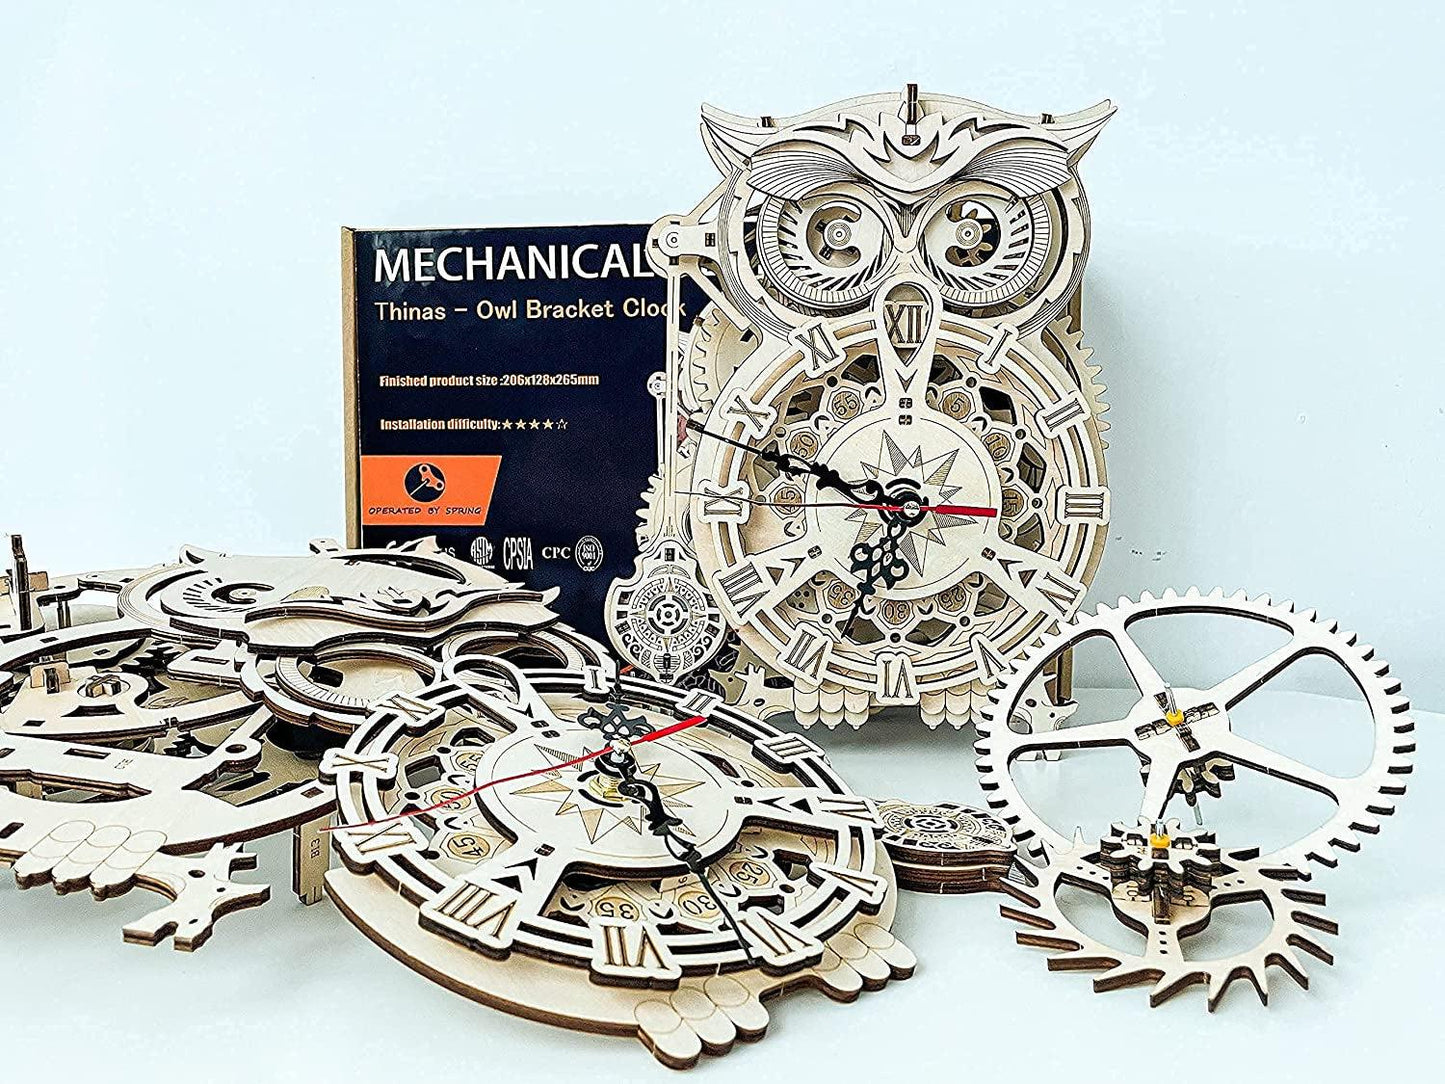 Owl Clock - 3D Puzzle, Wooden Toys, Craft Kits, DIY Model Gift for Adults; Brain Teaser Puzzles STEM Building - WoodArtSupply